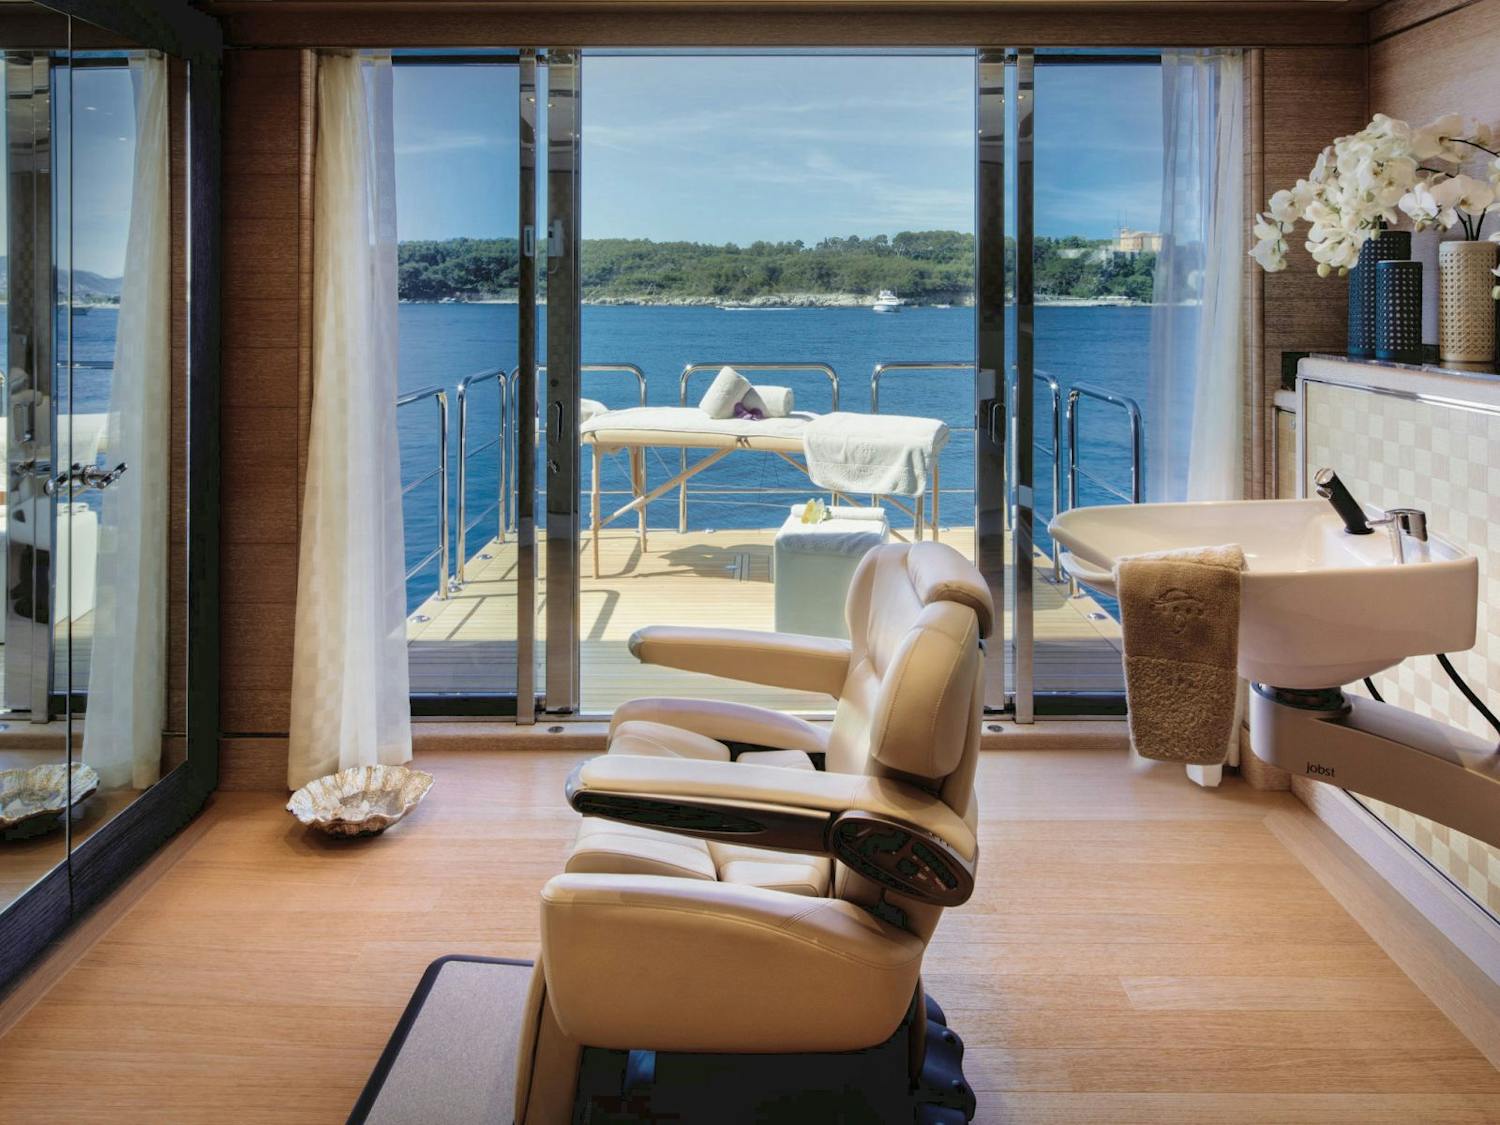 Inetrior spa chair and sink with massage table on the balcony overlooking the water. >